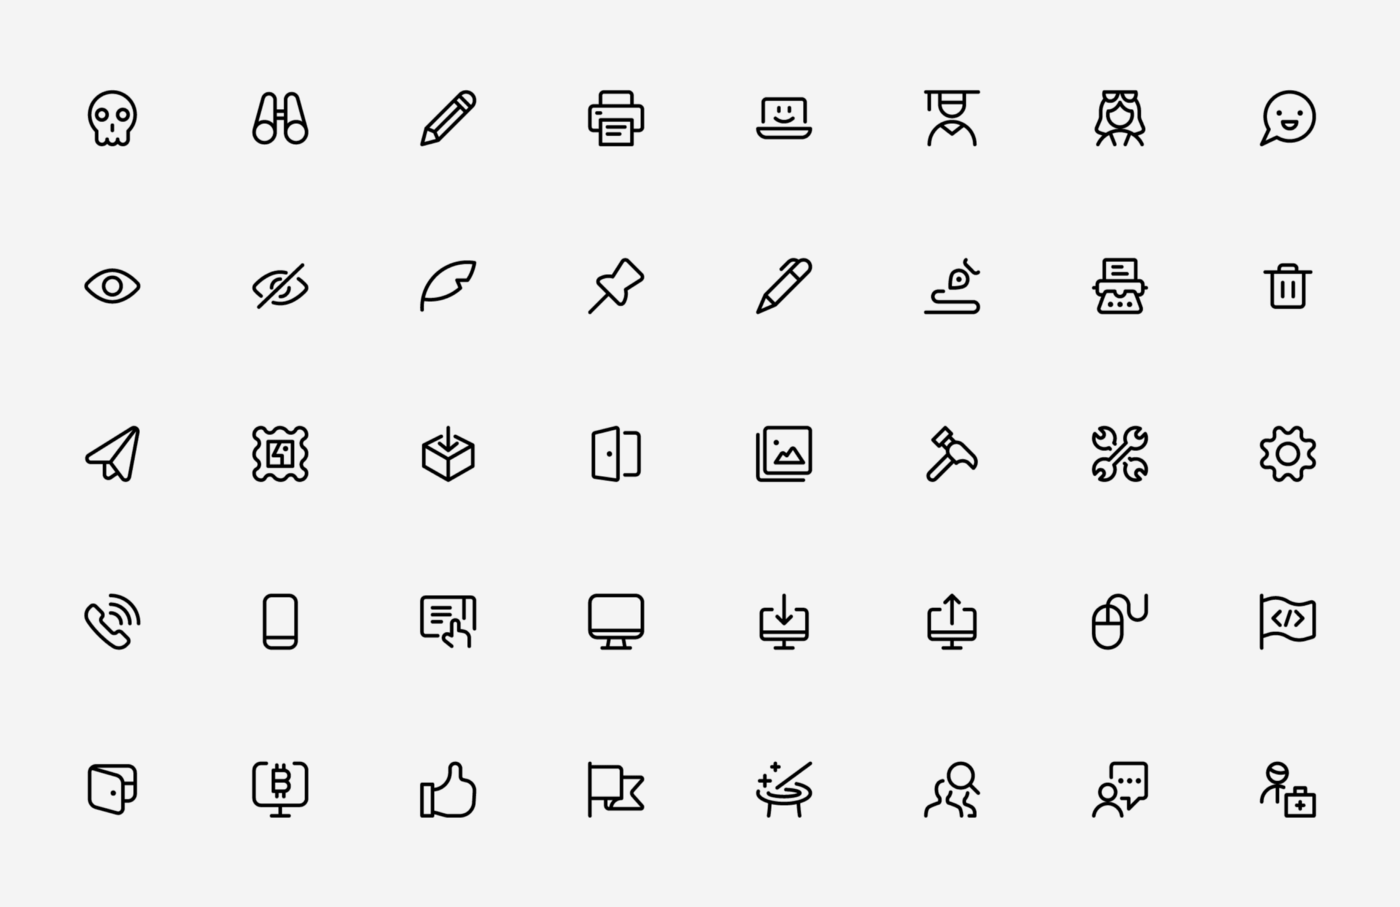 Font Awesome Web Application Icons